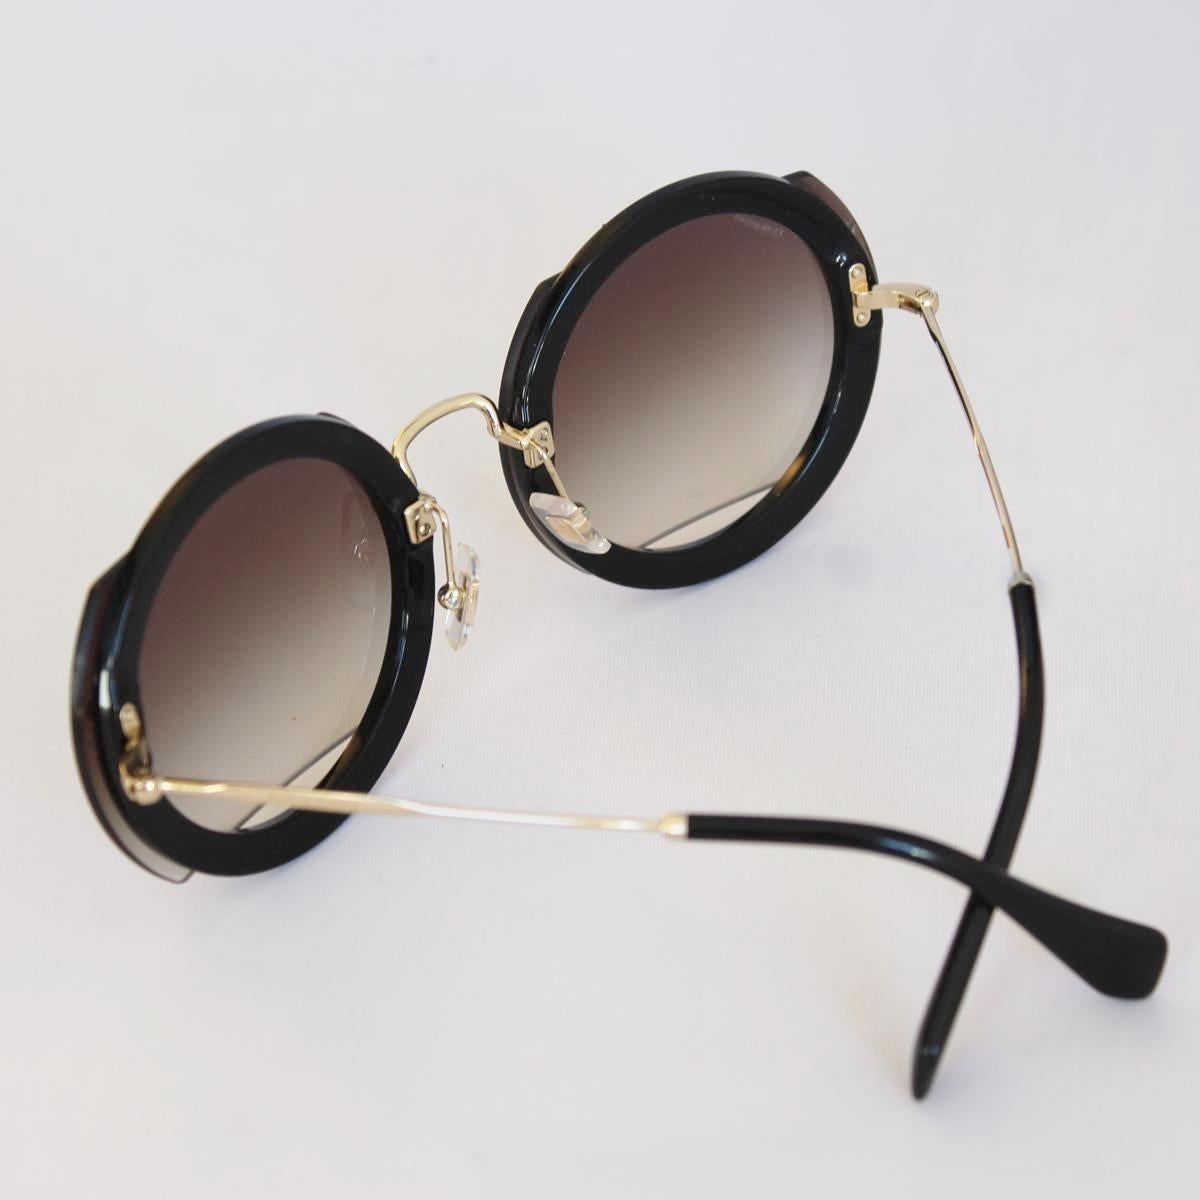 PE 2019
Miu Miu Reveal collection
Full circle design 
Cut-out lenses applied to glitter acetate frame front
Metal bridge and temples
Engraved Miu Miu lettering logo
Adjustable nose pads suitable for any fit
15 Cm length (5.9 inches)
Condition: New